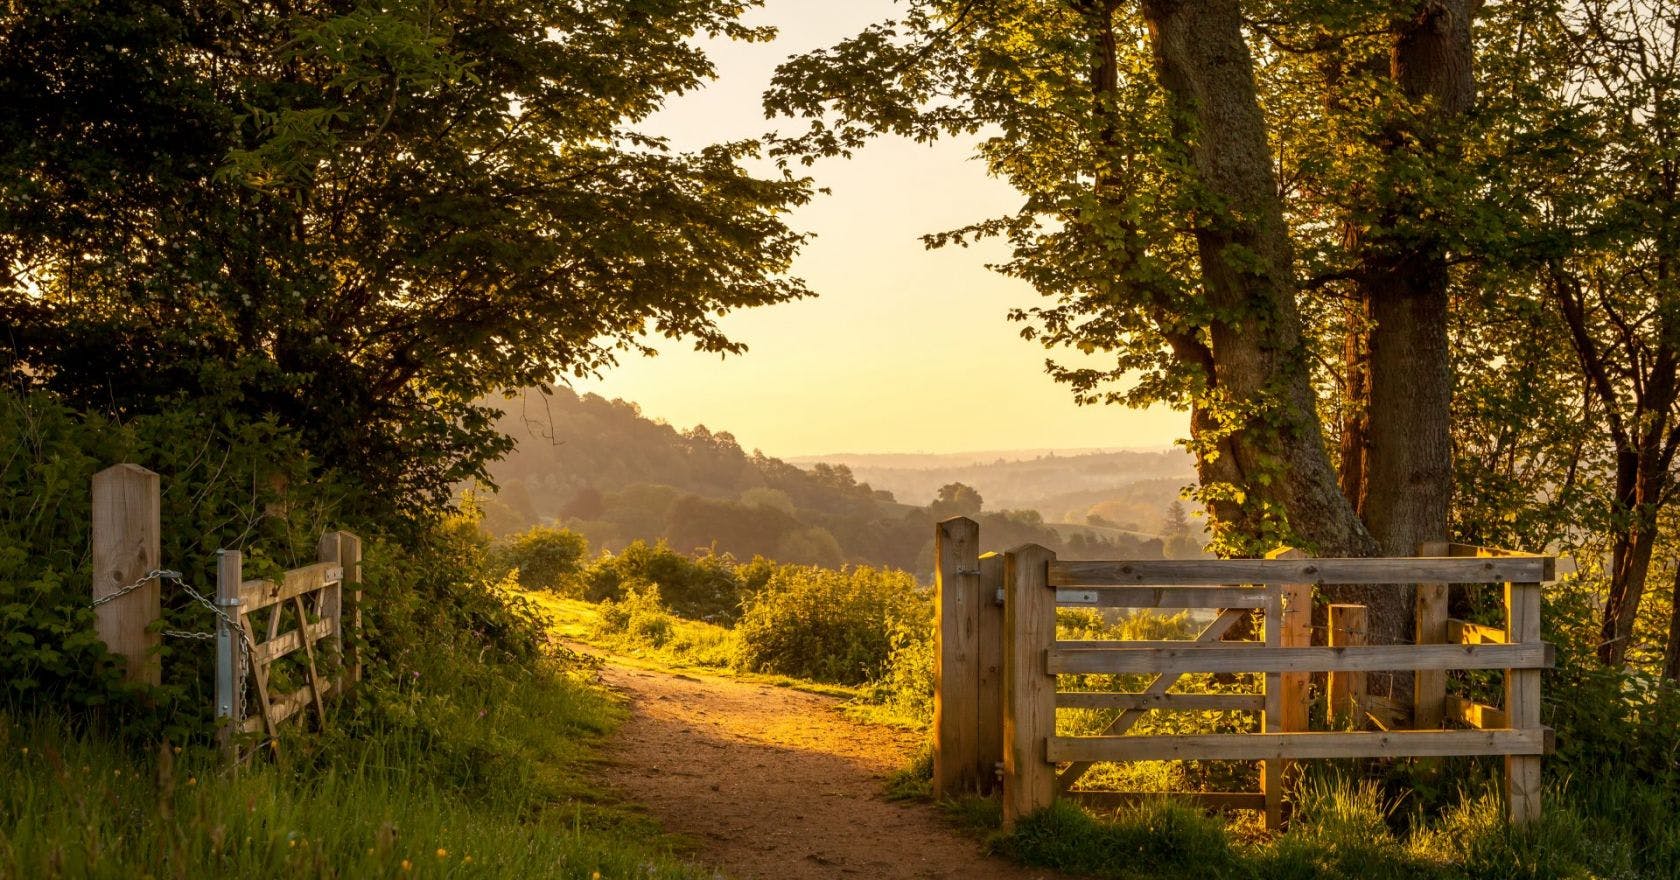 The 10 best countryside locations to relocate to in the UK